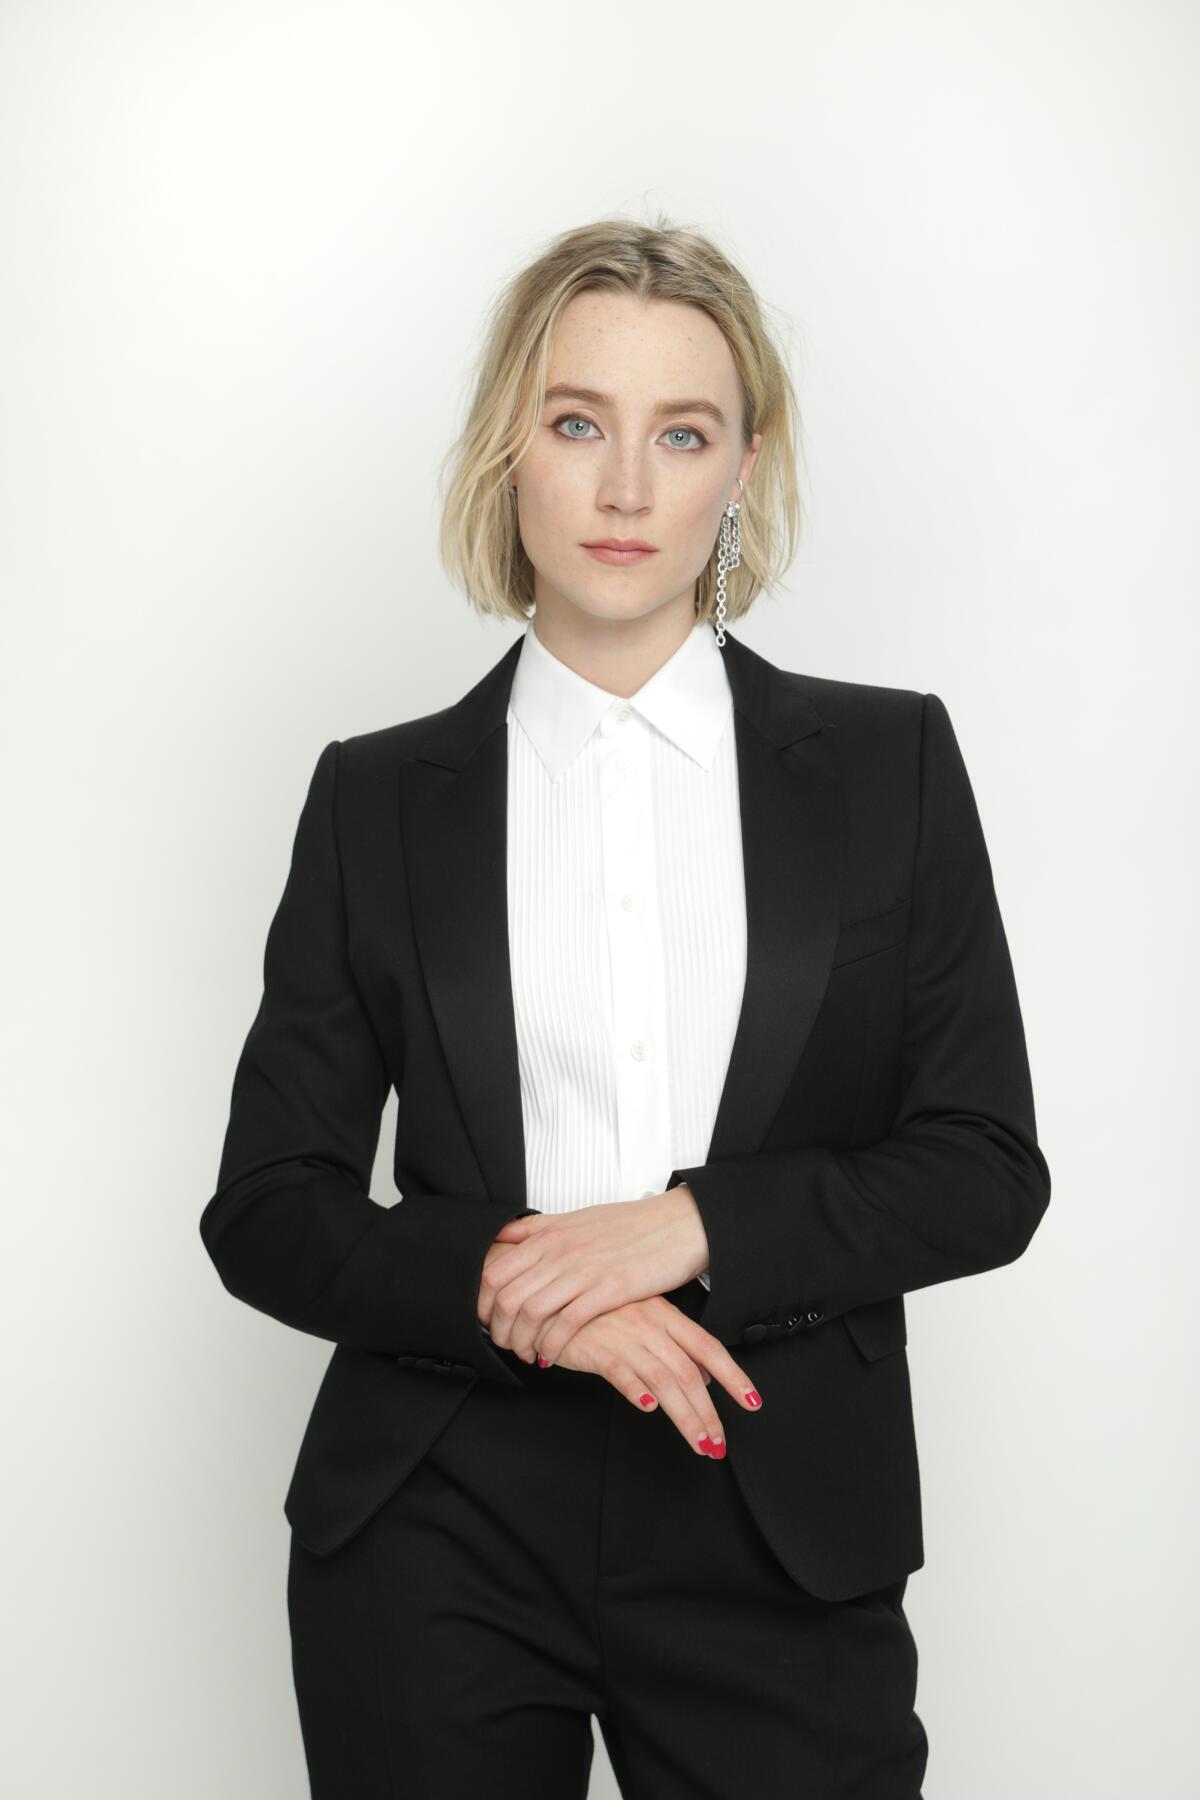 Saoirse Ronan is nominated in the lead actress category for her role in "Little Women."